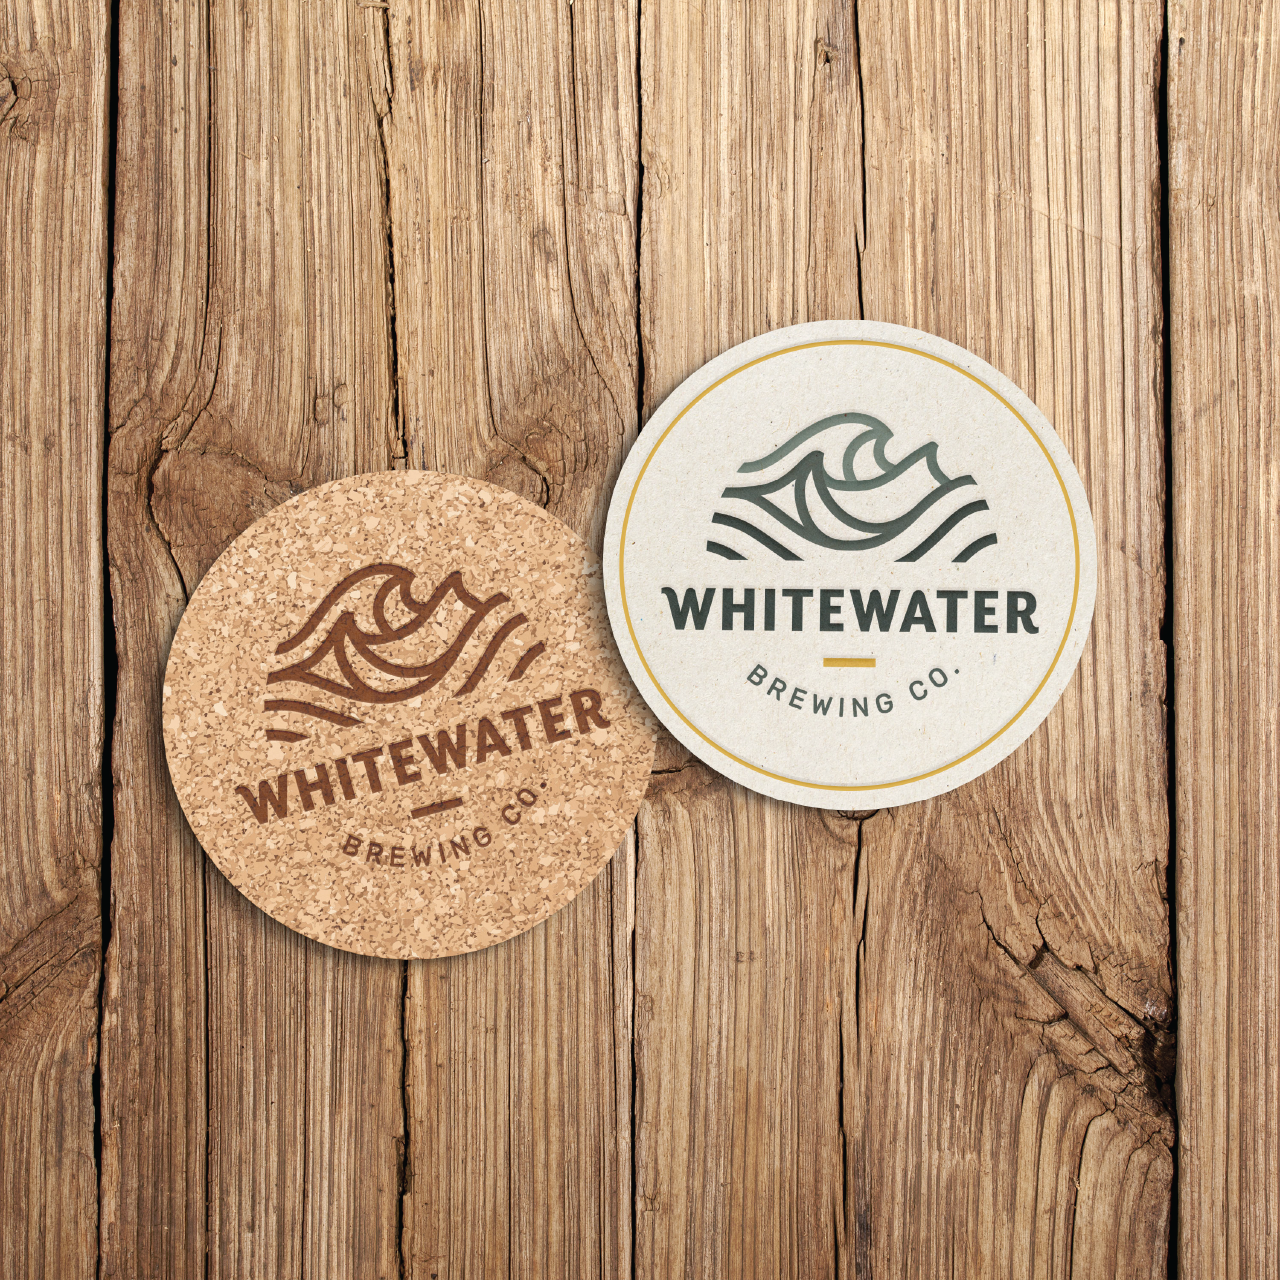 Whtiewater coaster samples